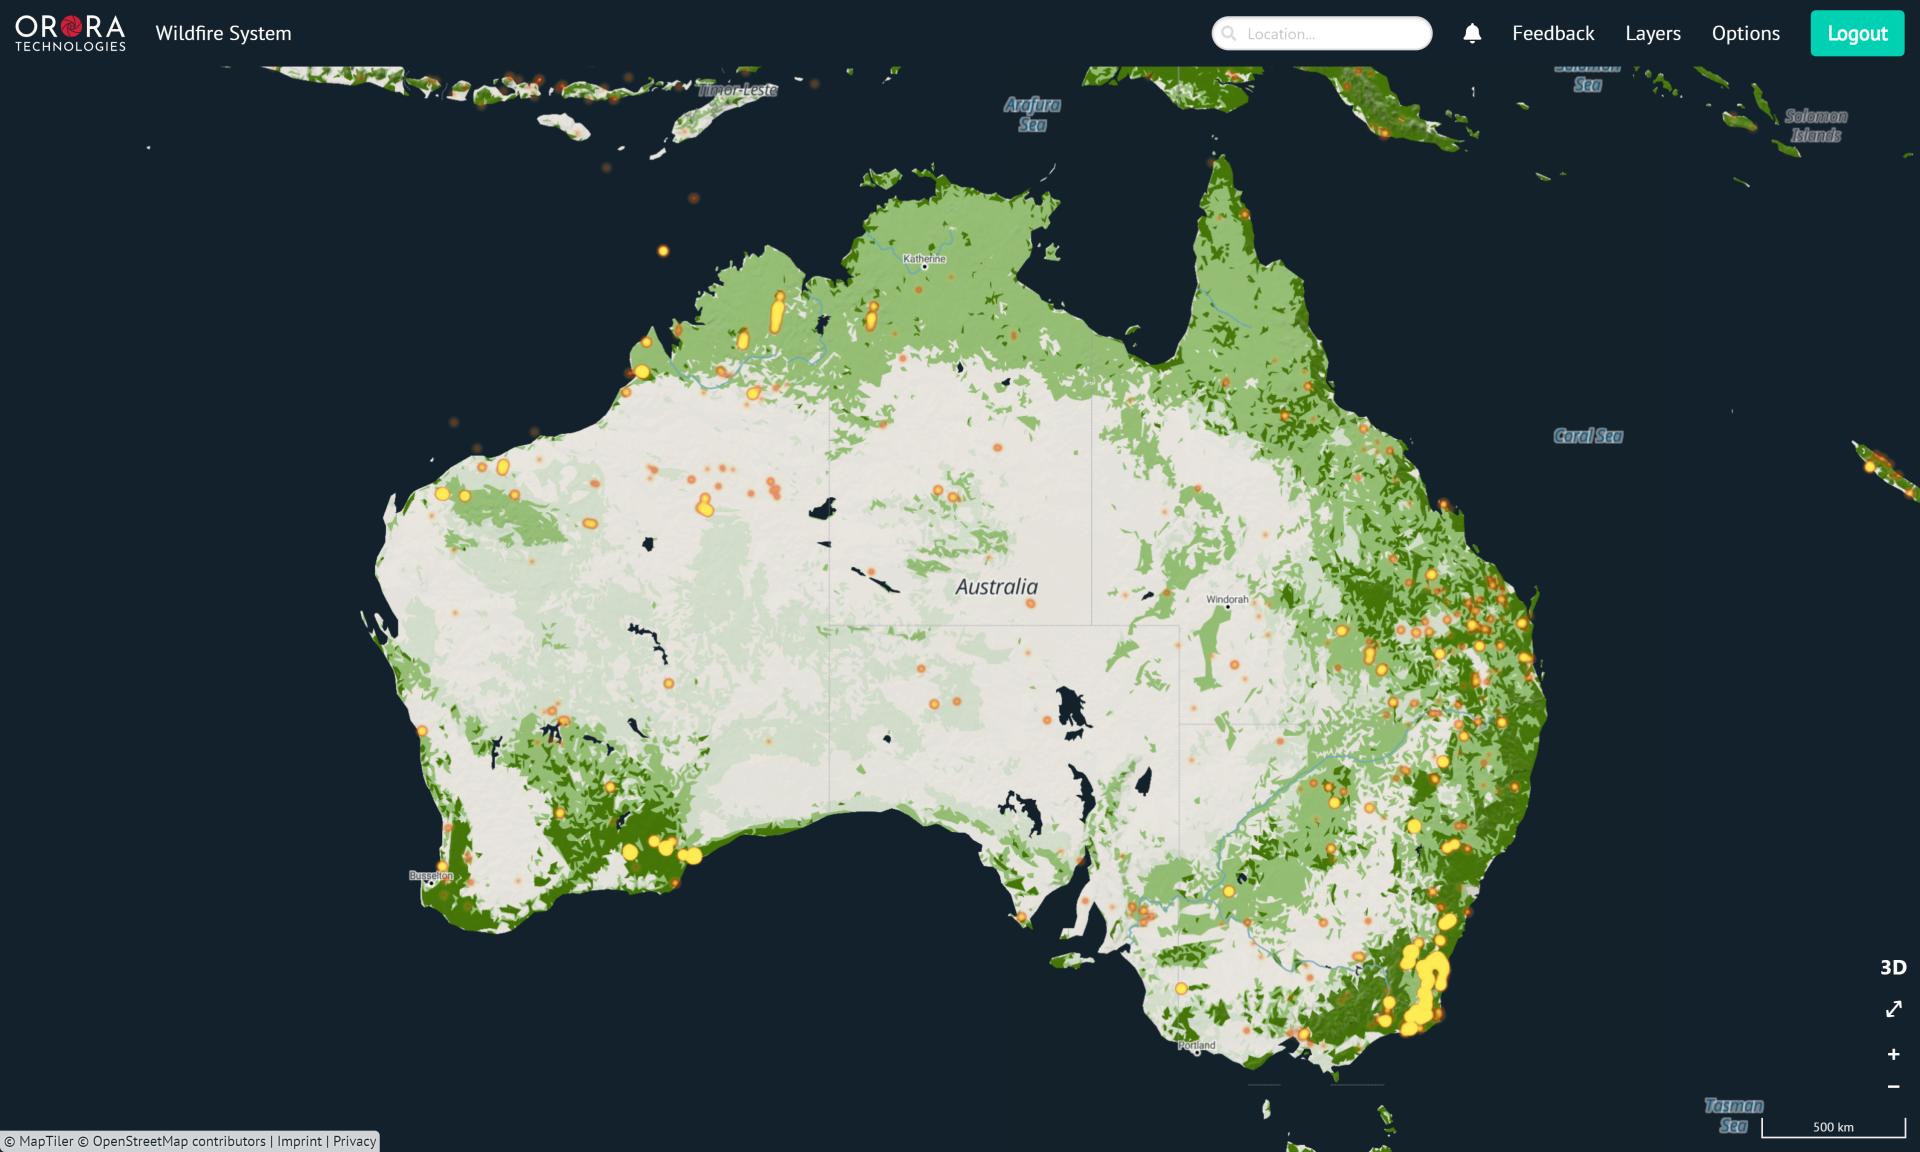 Early detection is vital and is provided here in the Heat Map layer showing hot spot detection in Australia. 